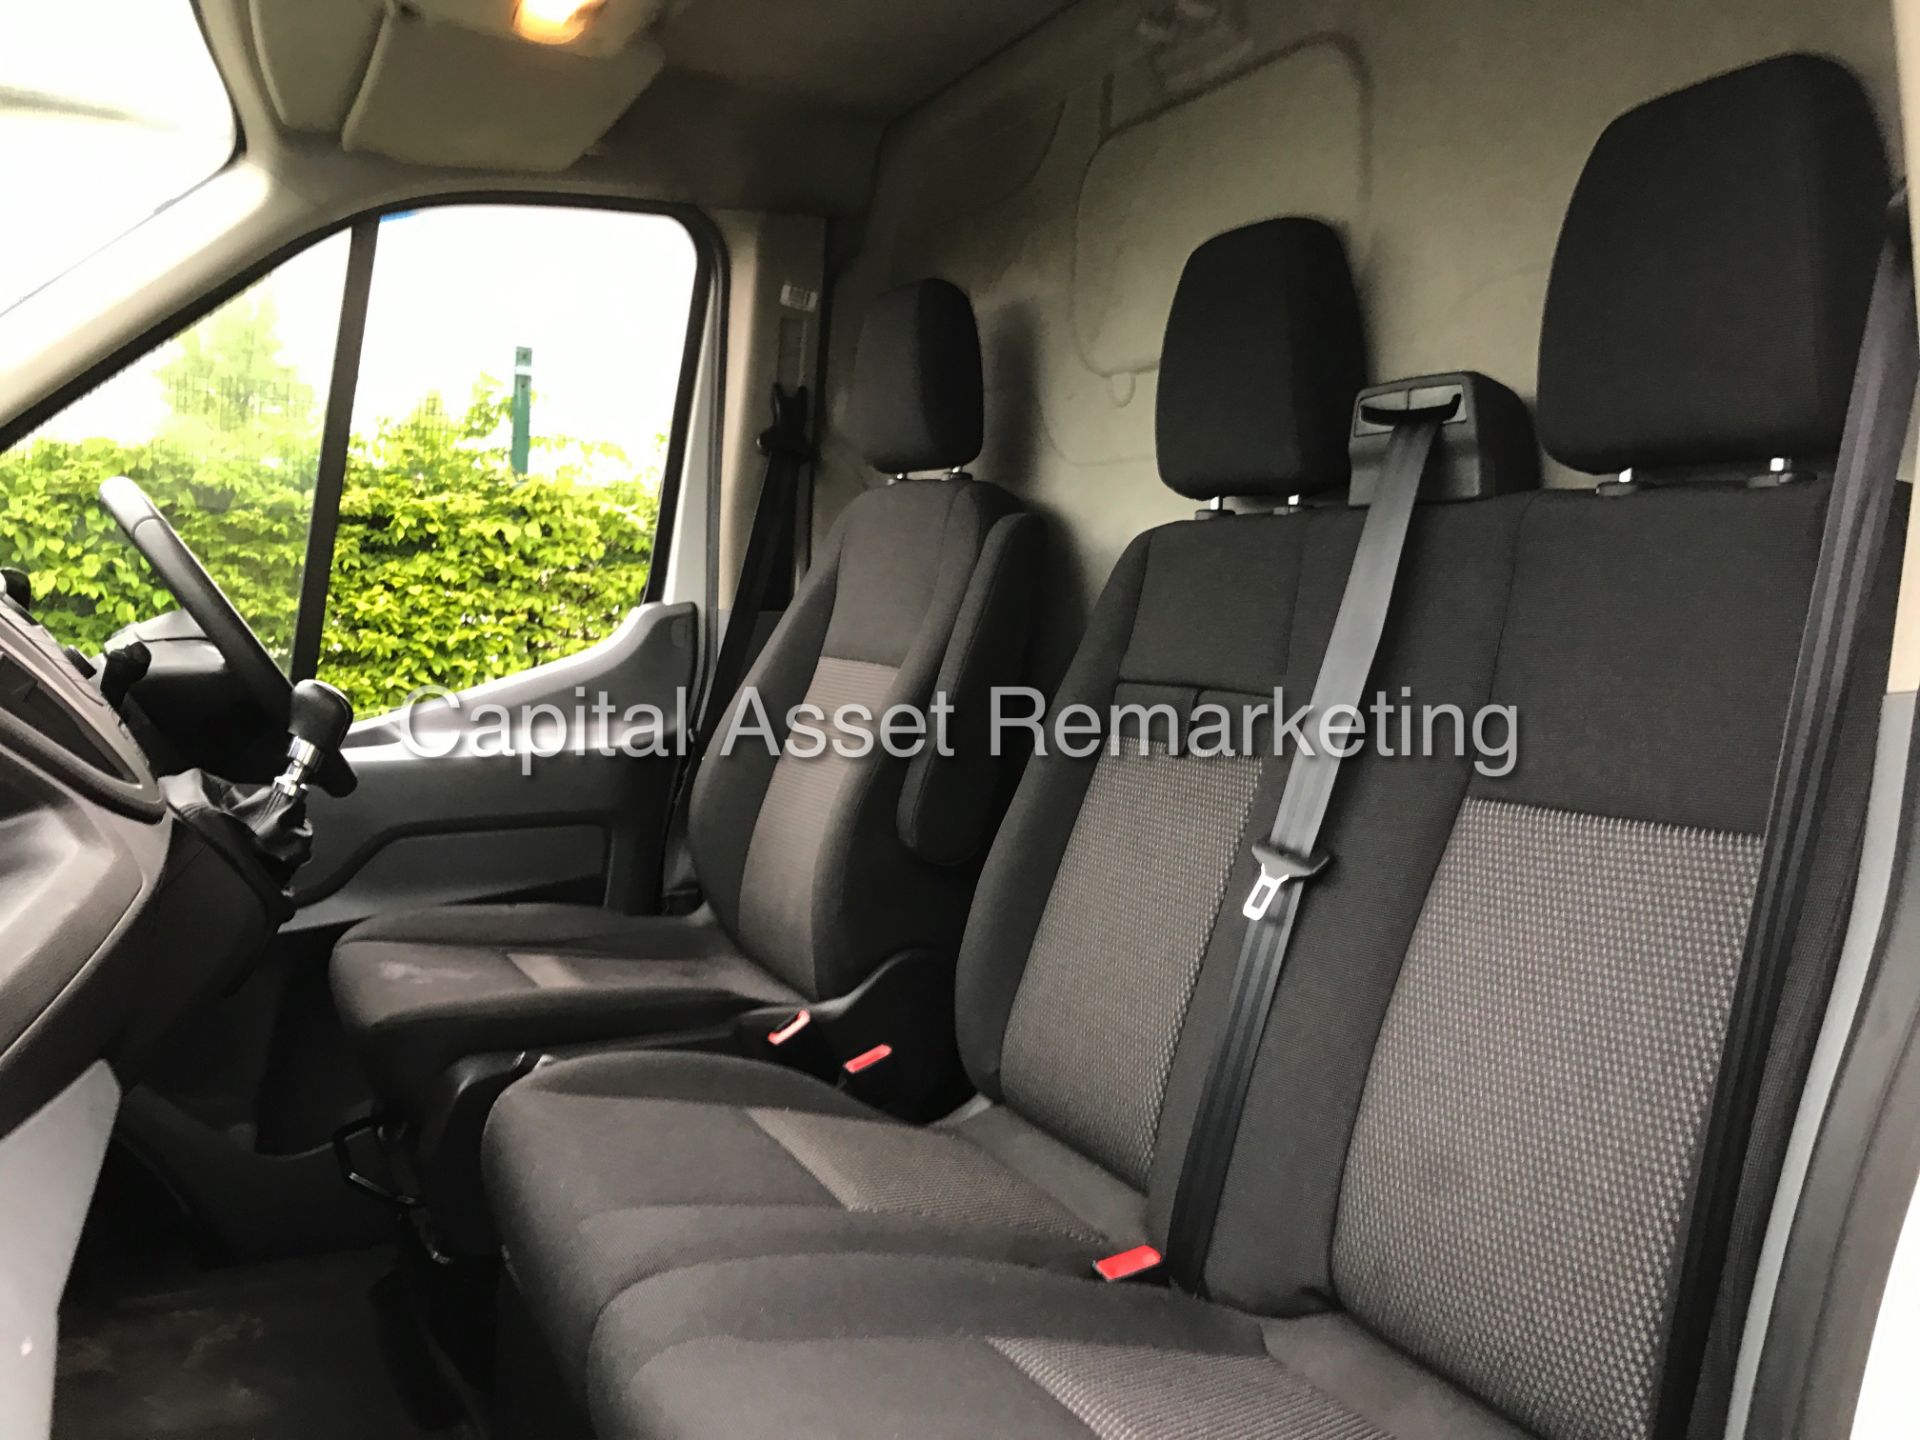 (ON SALE) FORD TRANSIT 2.2TDCI "125BHP - 6 SPEED" 350 LONG WHEEL BASE/ HIGH ROOF "NEW SHAPE" - Image 10 of 10